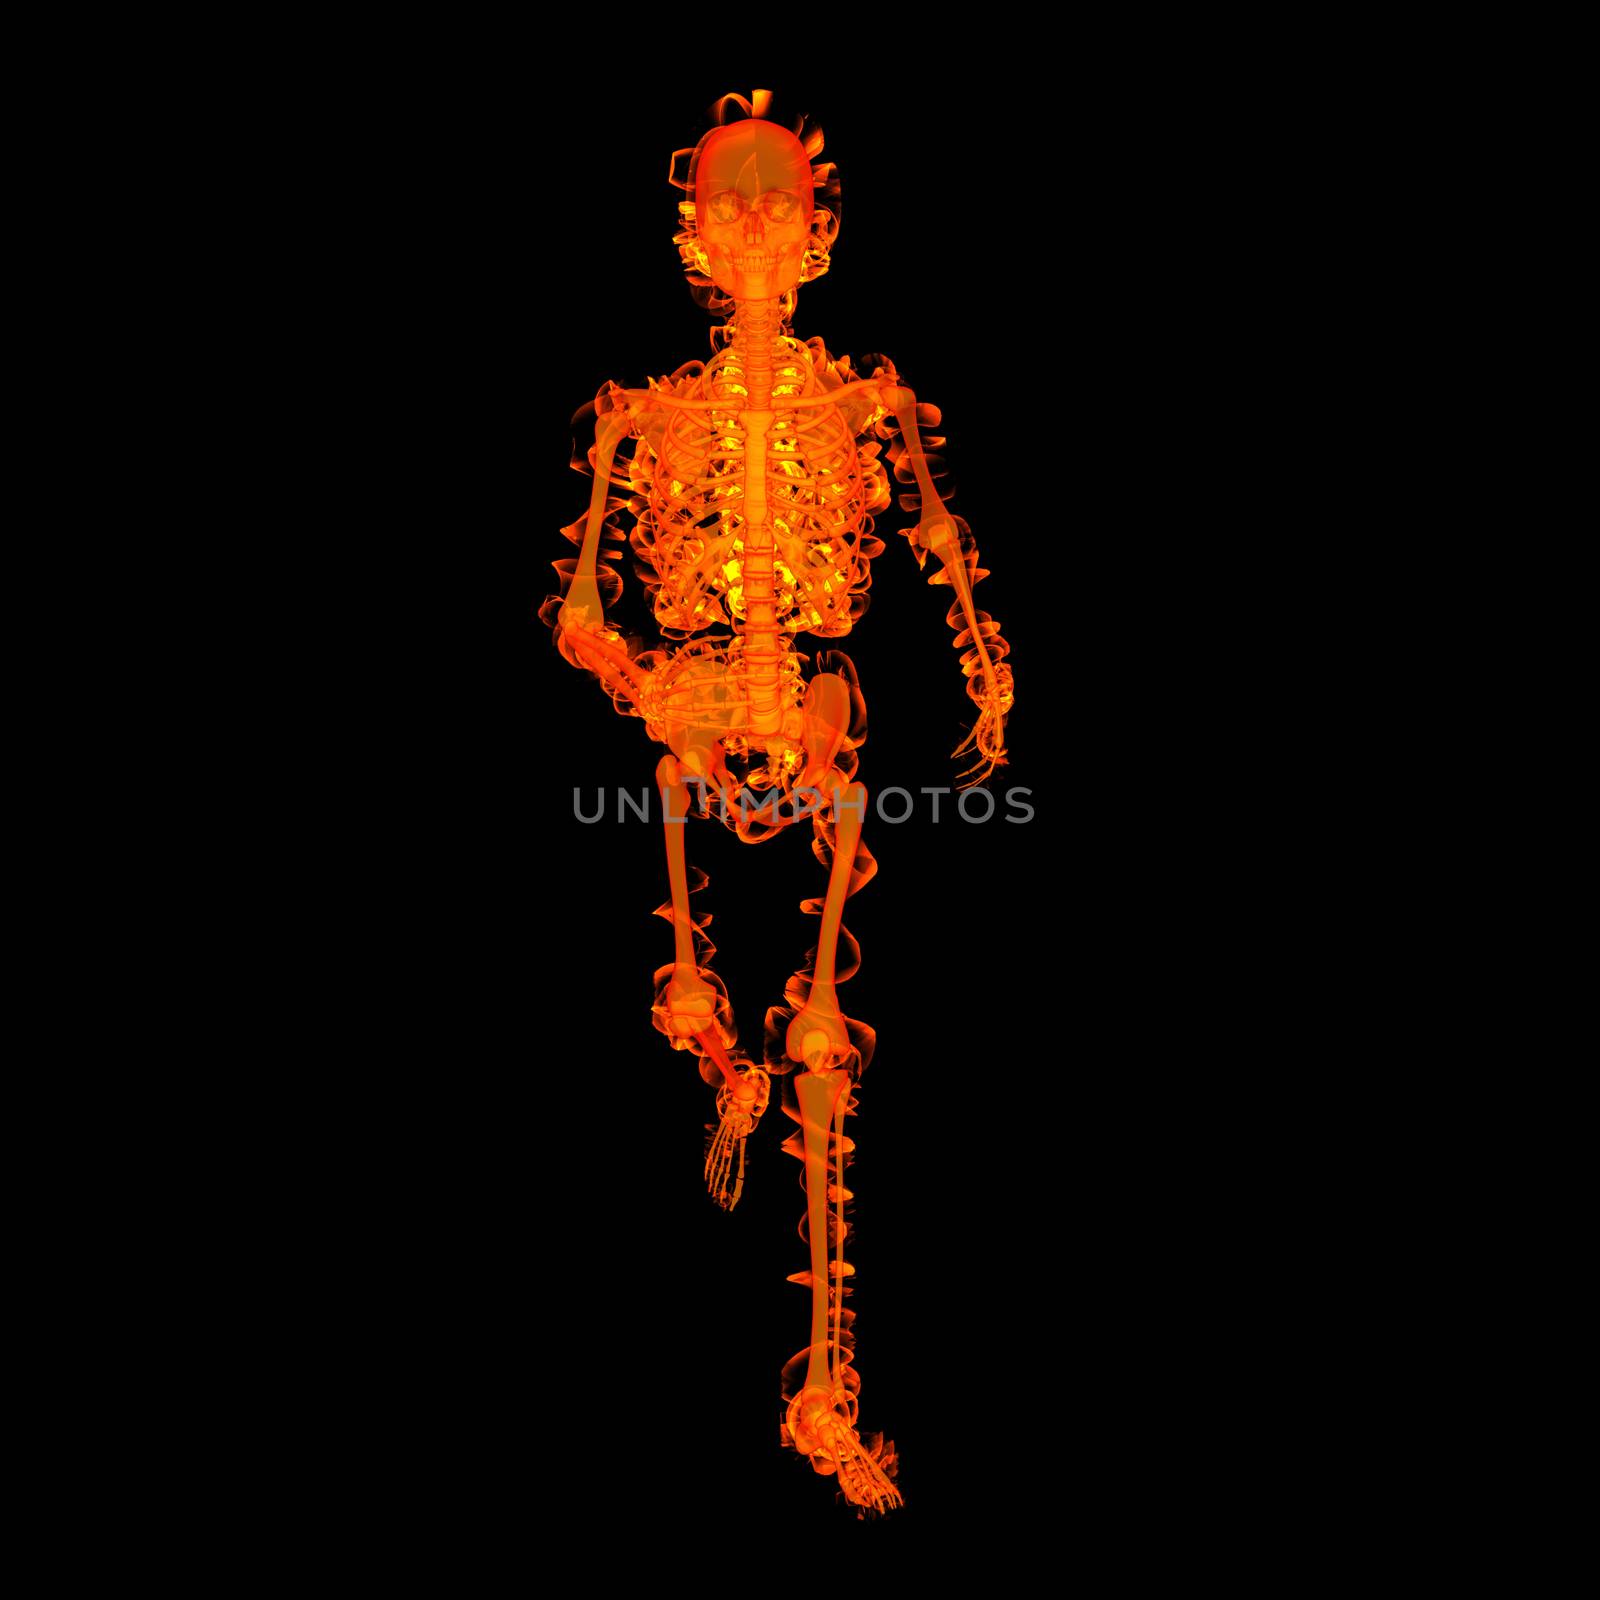 walking fire skeleton by X-rays in red by maya2008